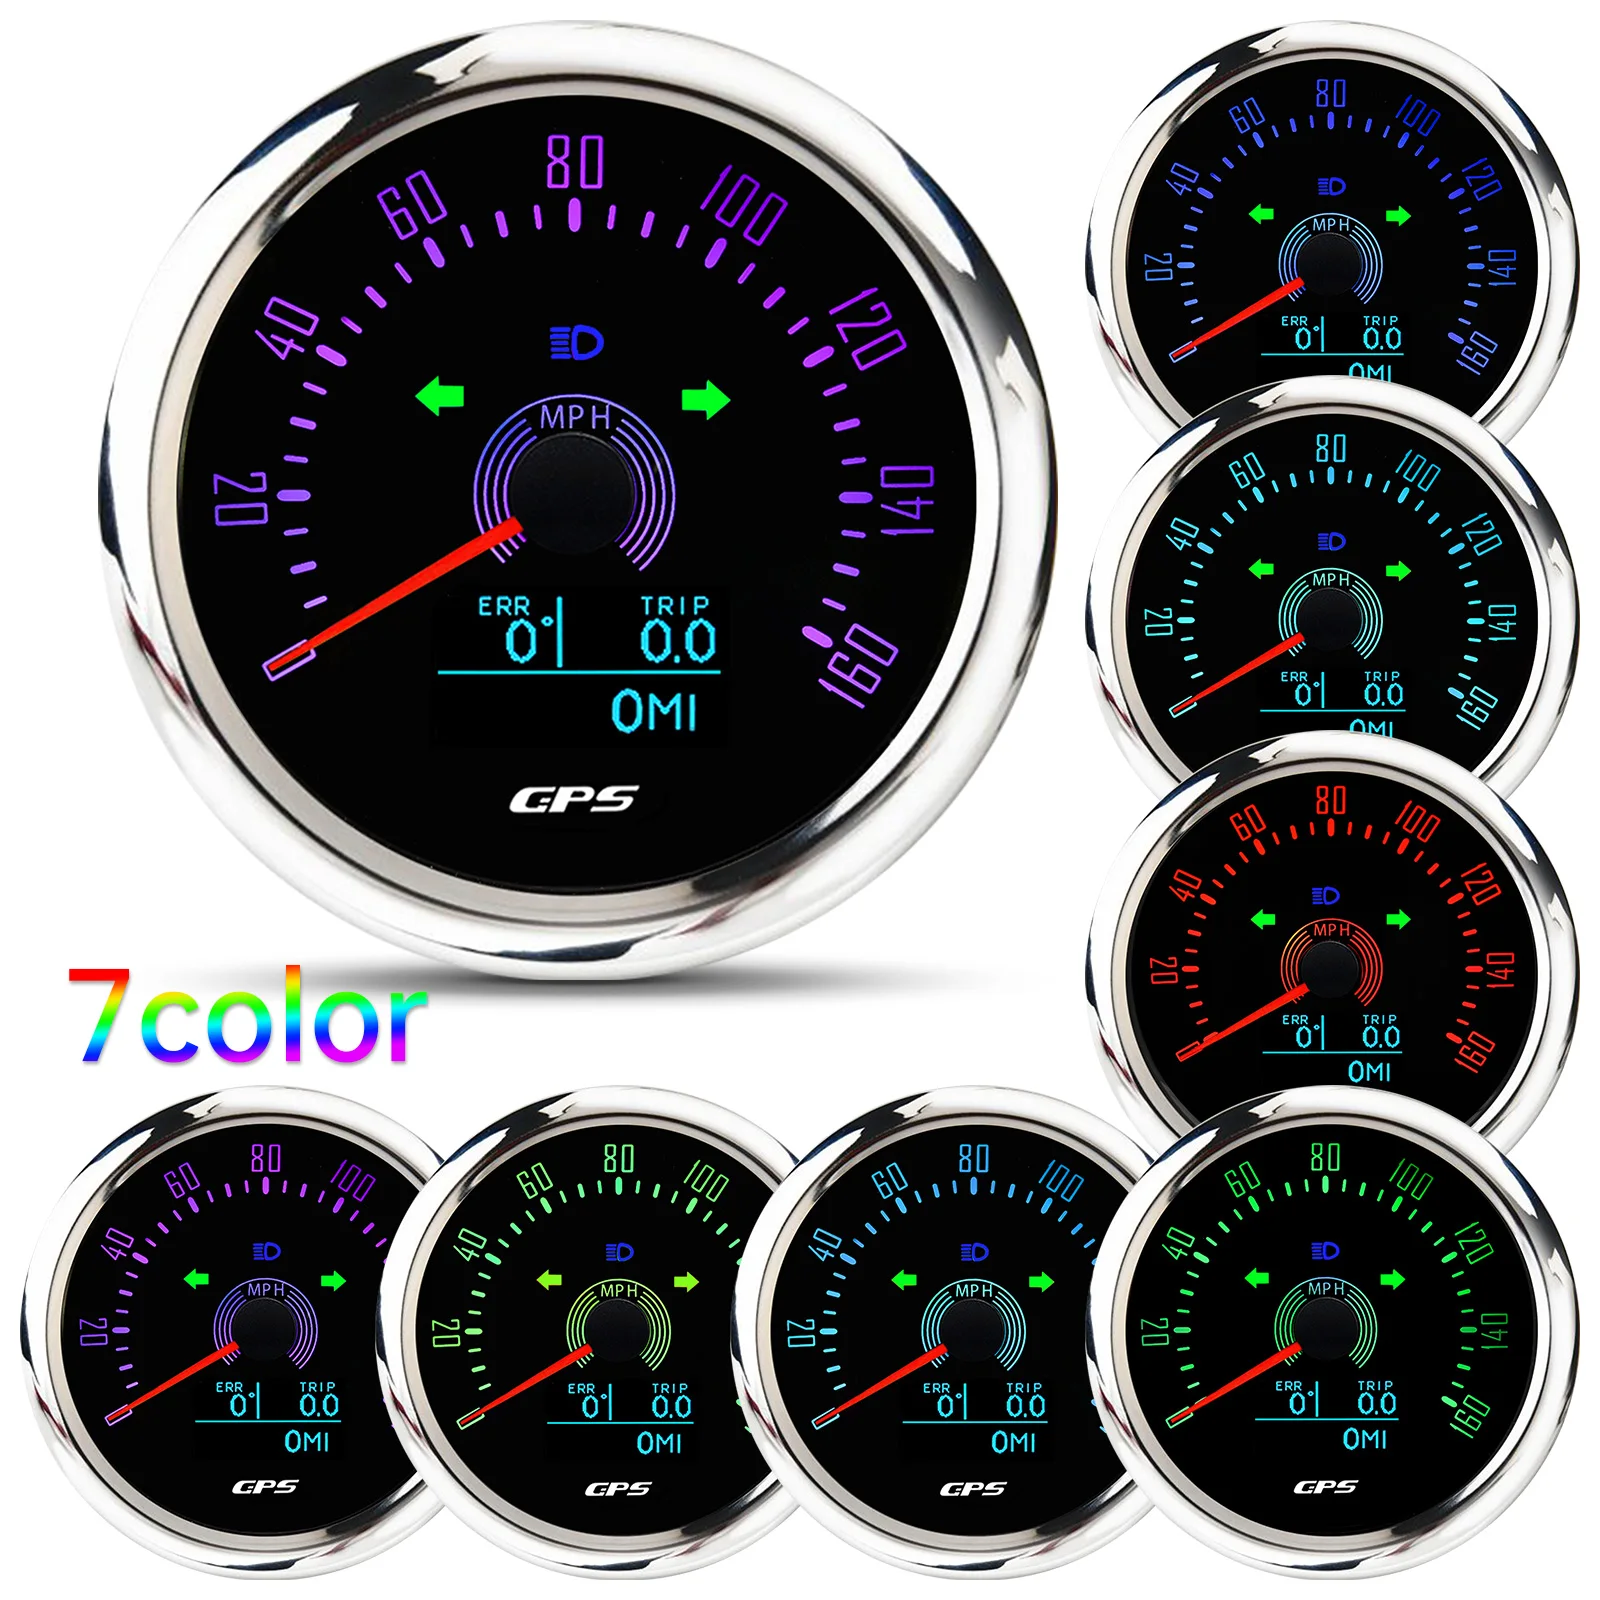 

7 Color Backlight GPS Speedometer Odometer 85mm Speed Gauge 160MPH 200km/h With GPS Antenna For Marine Boat Car ATV Truck 9-32V